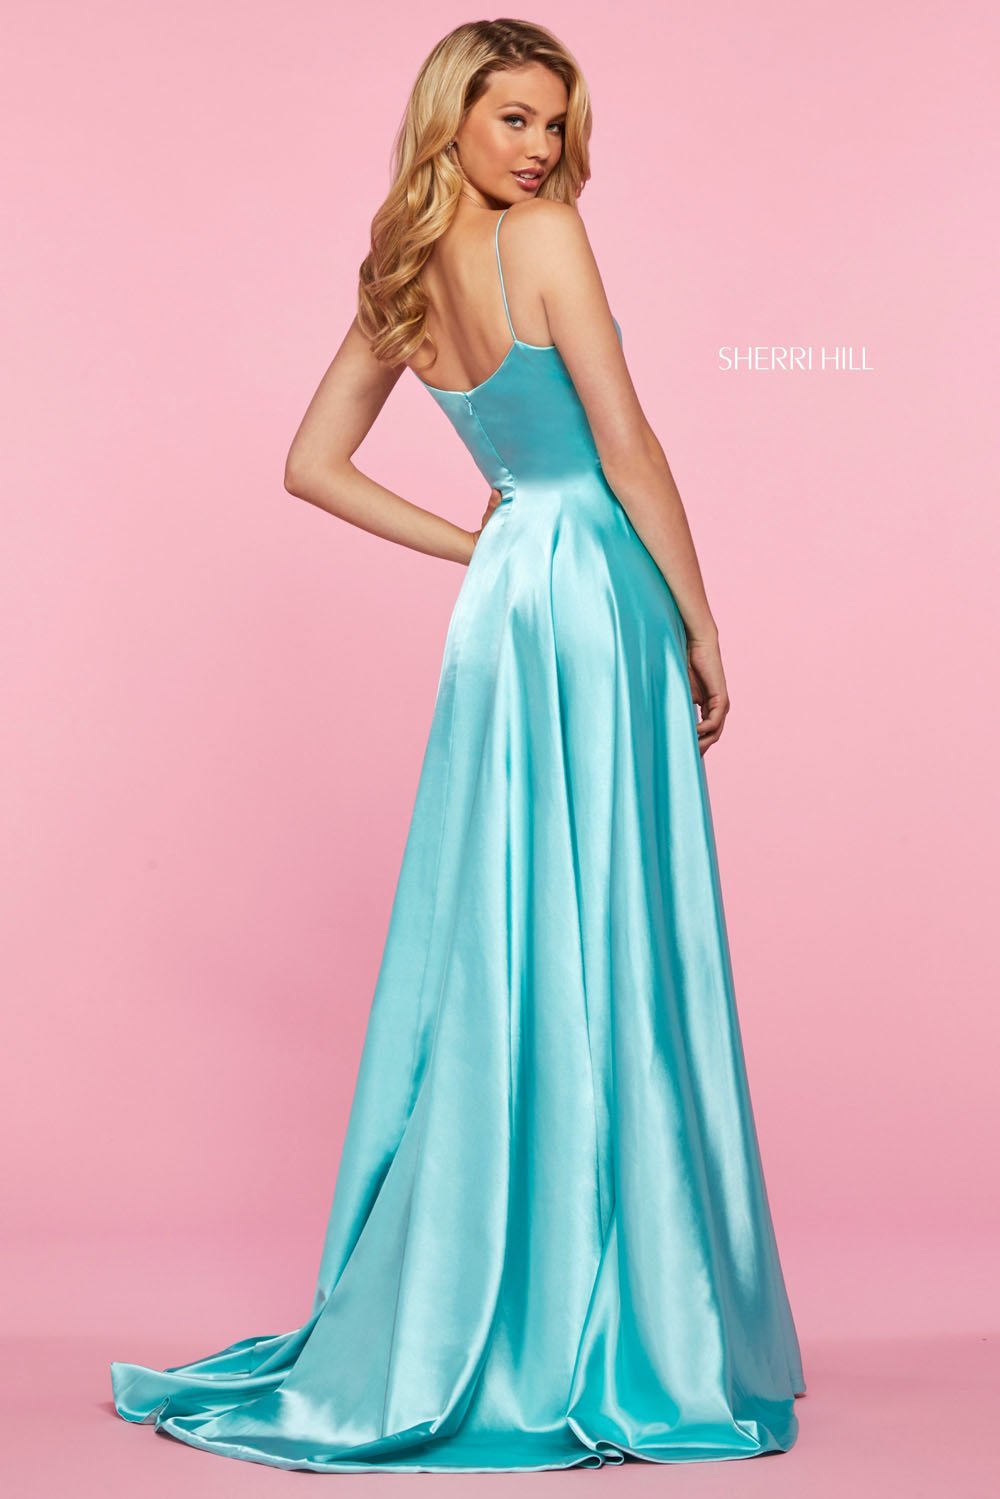 Sherri Hill 53299 dress images in these colors: Gold, Black, Lilac, Ivory, Red, Gunmetal, Emerald, Yellow, Royal, Mocha, Wine, Teal, Aqua, Coral, Rose, Navy, Light Blue.